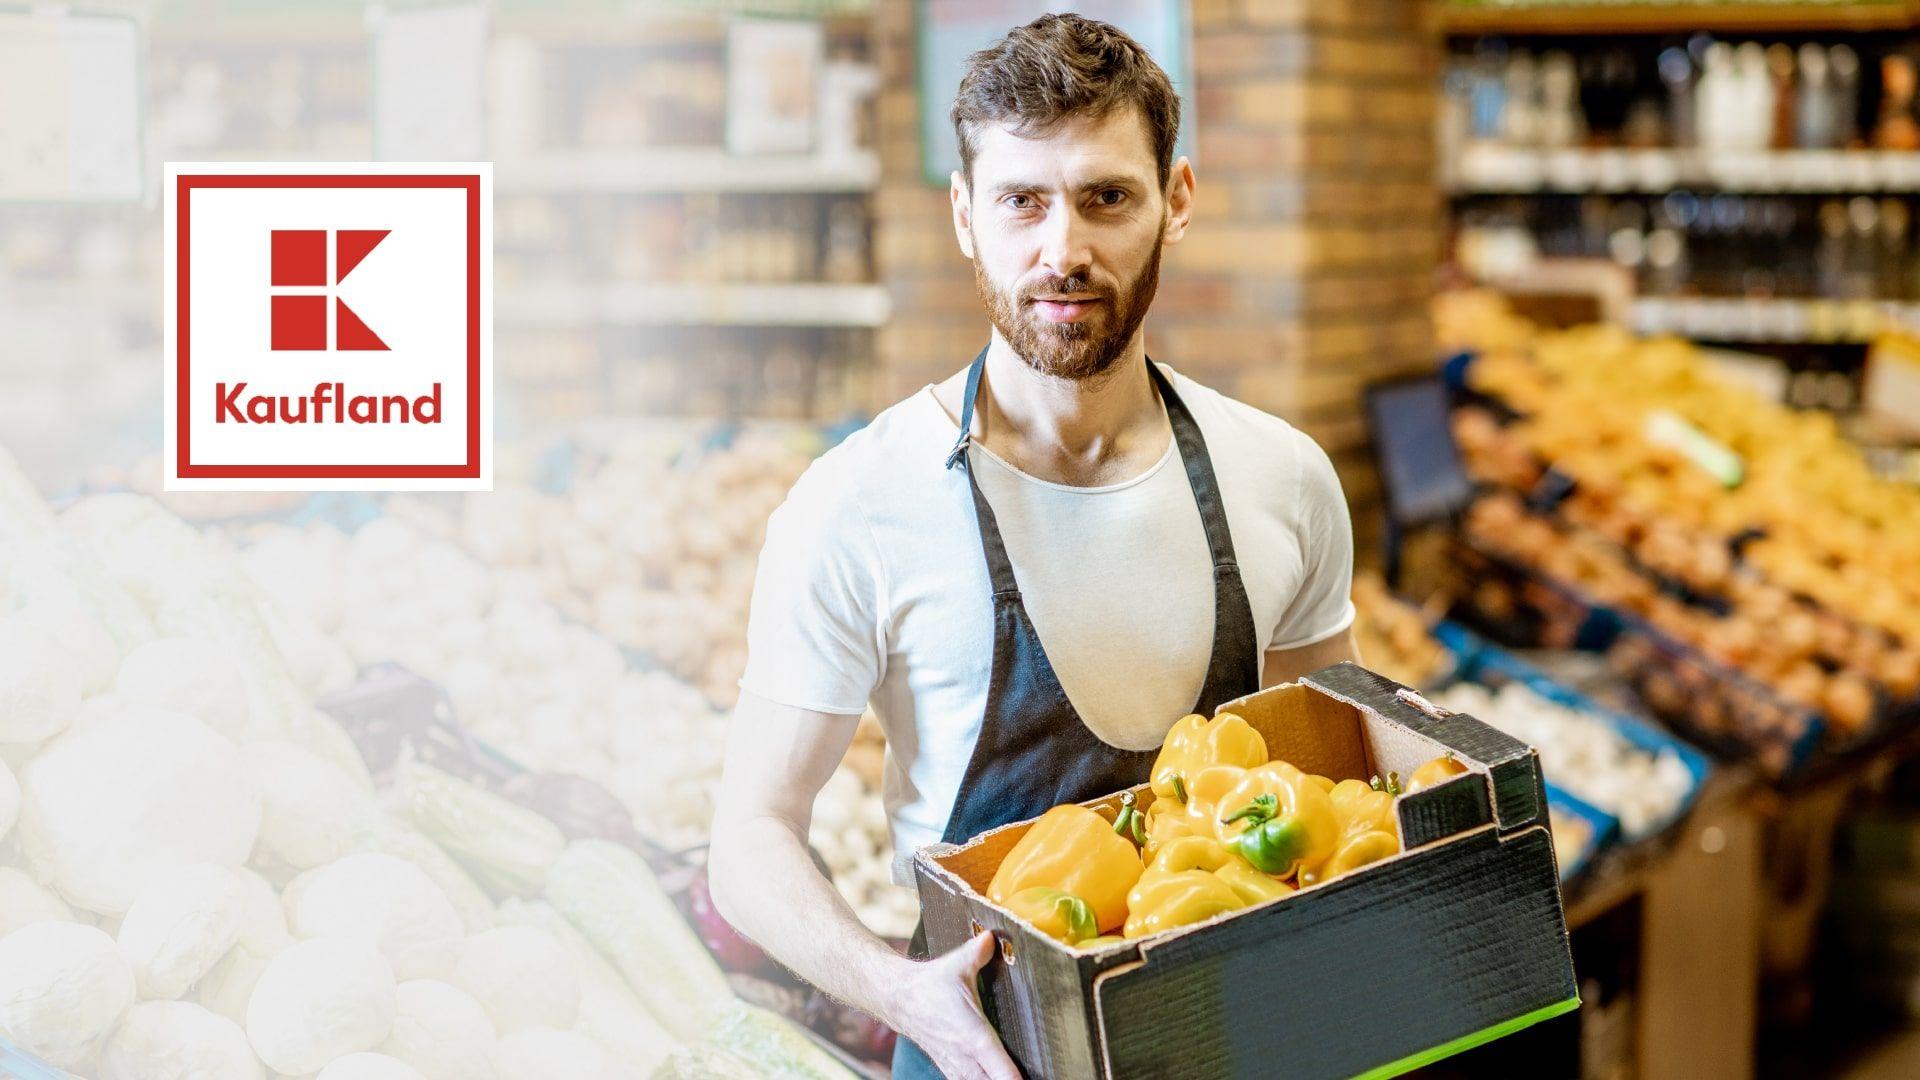 Kaufland connected with drivers to effectively boost brand engagement preview image